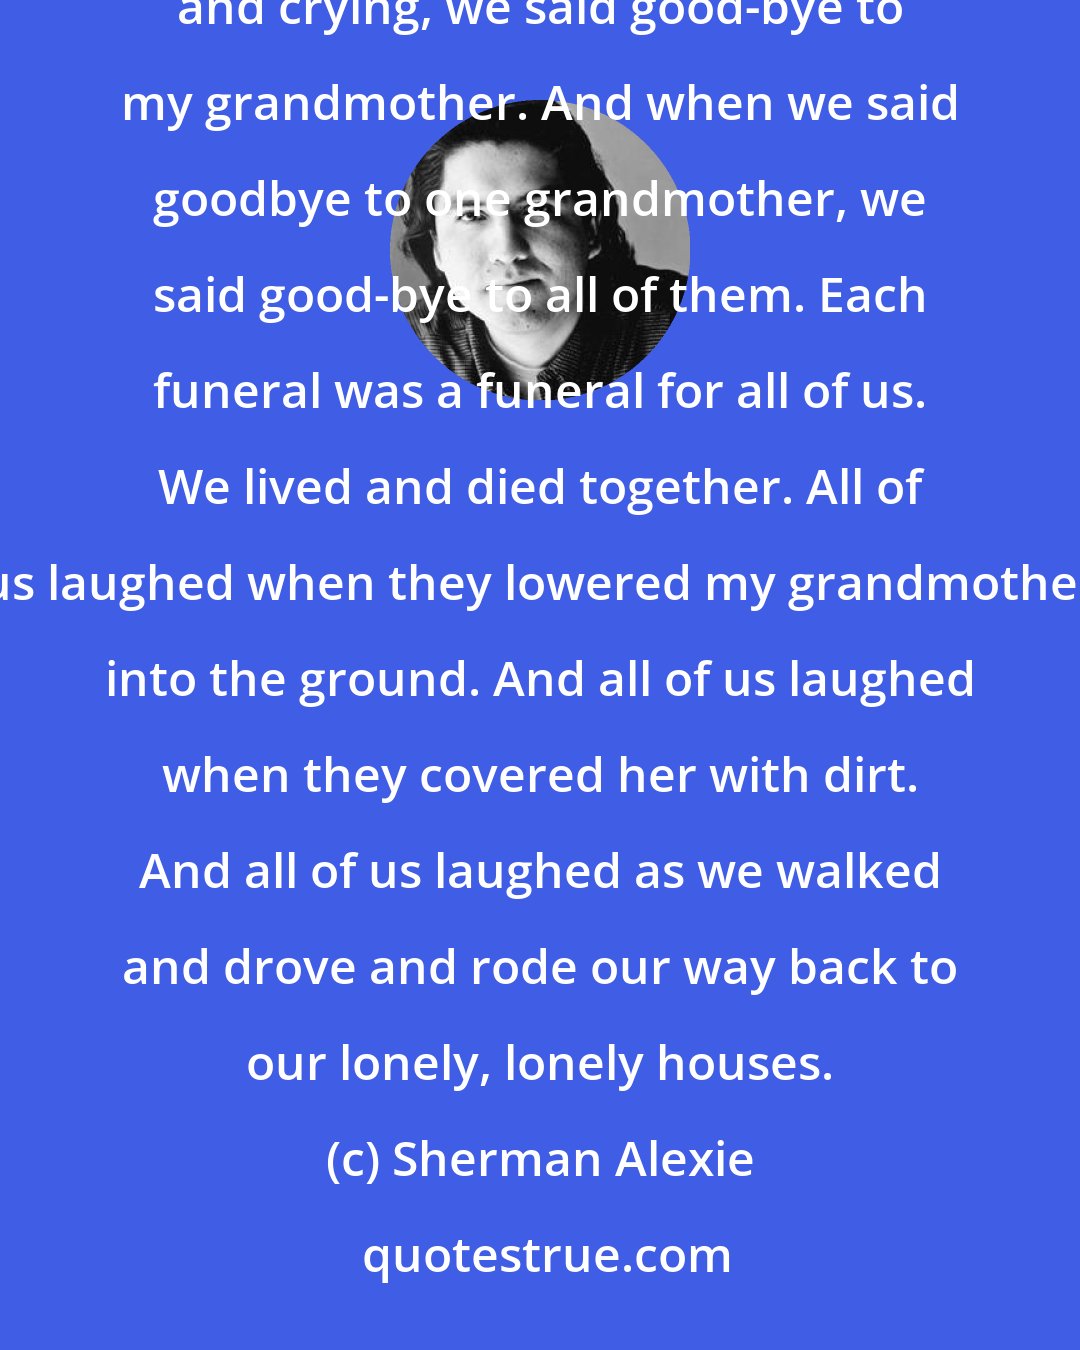 Sherman Alexie: When it comes to death, we know that laughter and tears are pretty much the same thing. And so, laughing and crying, we said good-bye to my grandmother. And when we said goodbye to one grandmother, we said good-bye to all of them. Each funeral was a funeral for all of us. We lived and died together. All of us laughed when they lowered my grandmother into the ground. And all of us laughed when they covered her with dirt. And all of us laughed as we walked and drove and rode our way back to our lonely, lonely houses.